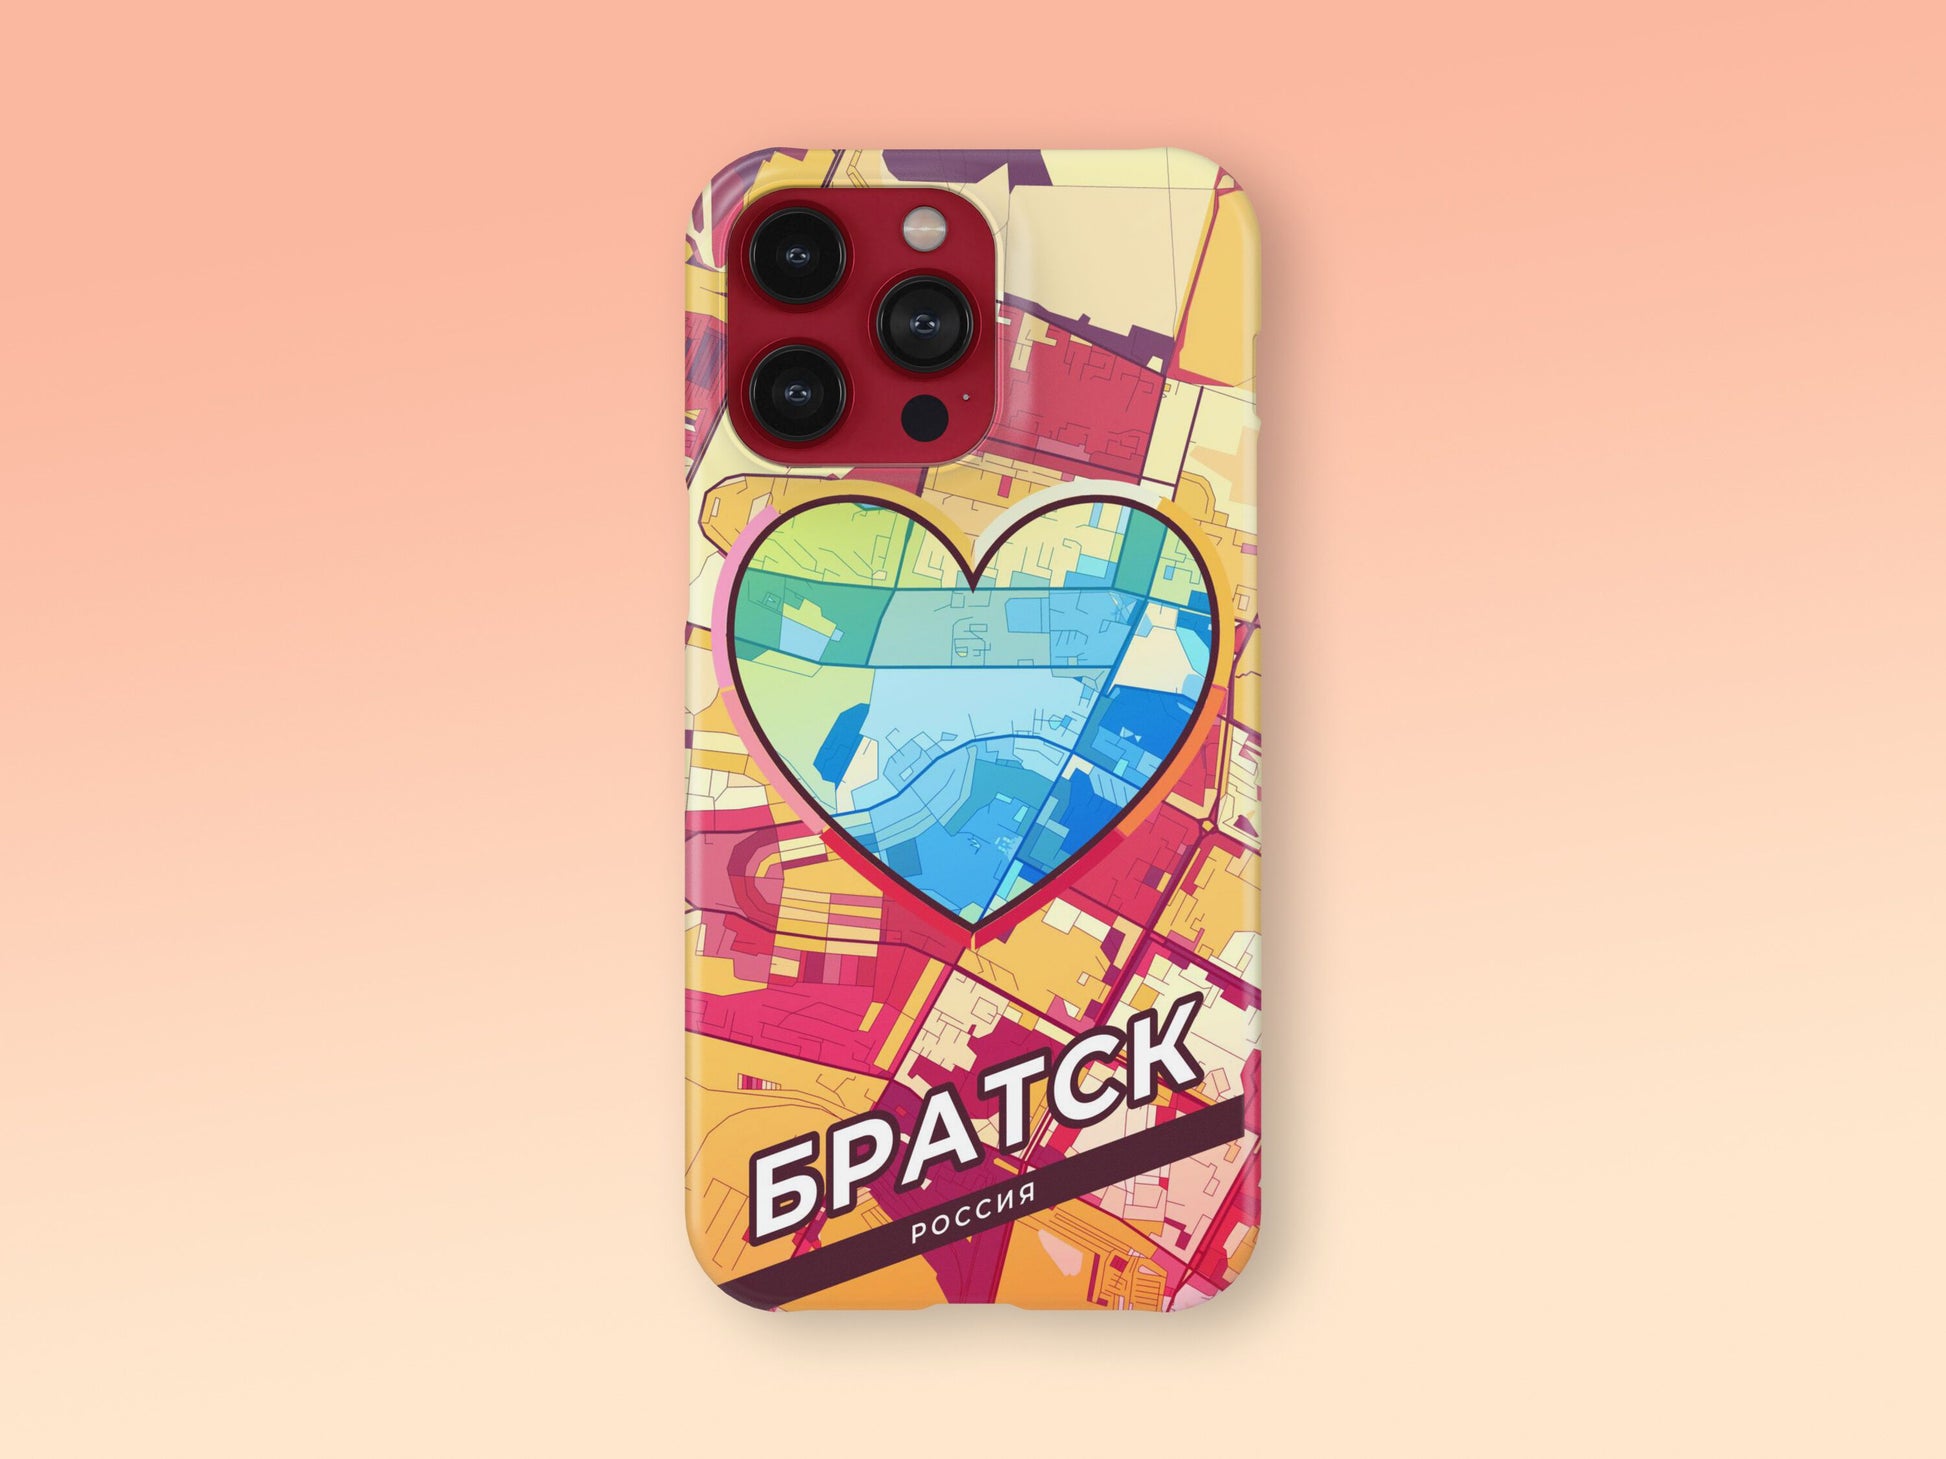 Bratsk Russia slim phone case with colorful icon. Birthday, wedding or housewarming gift. Couple match cases. 2